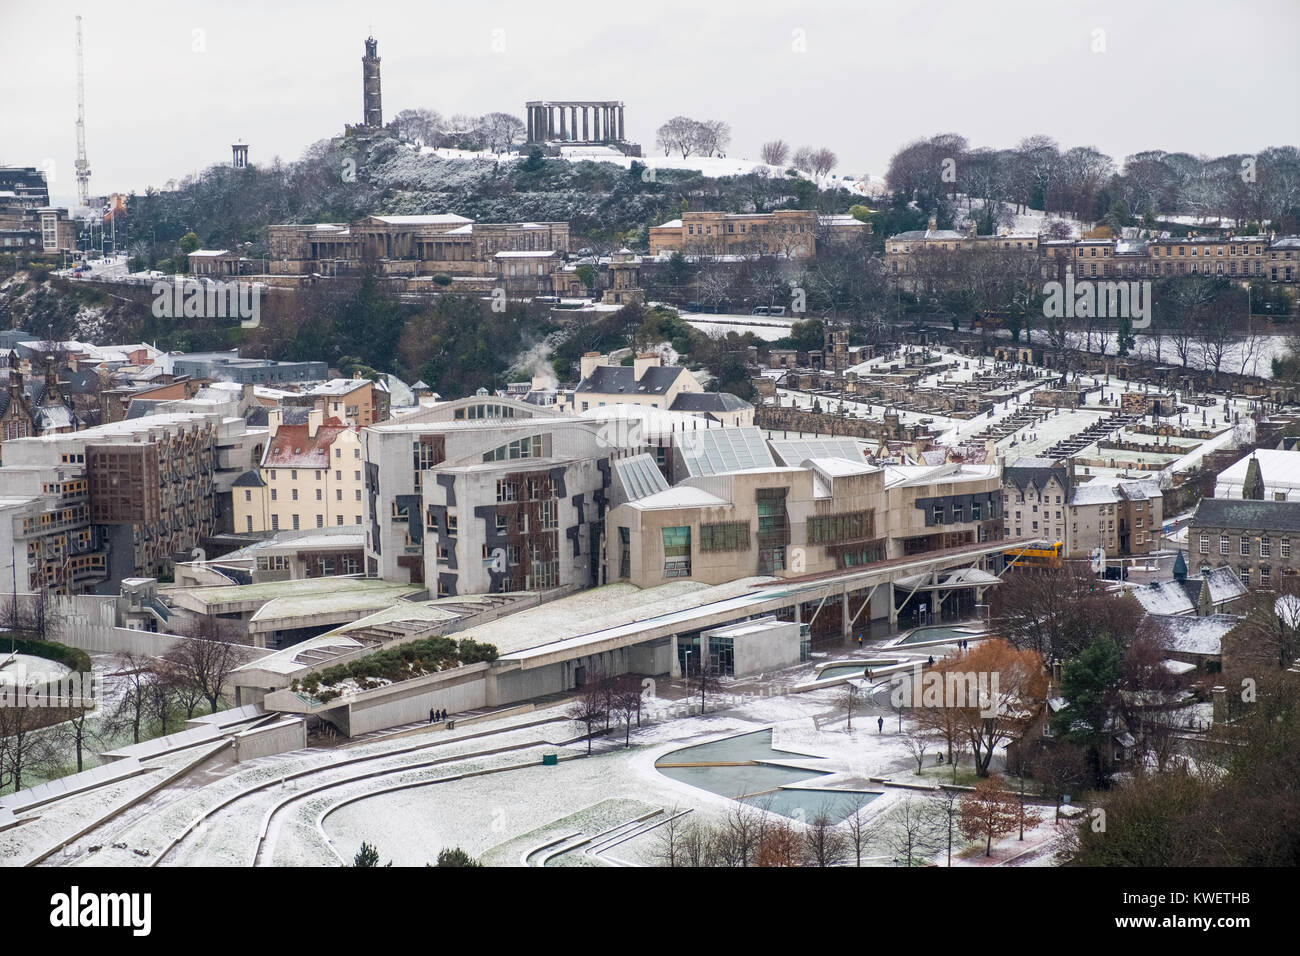 Snow falls on city of Edinburgh in December. Skyline view of city towards the Scottish Parliament Building at Holyrood and Calton Hill. Stock Photo